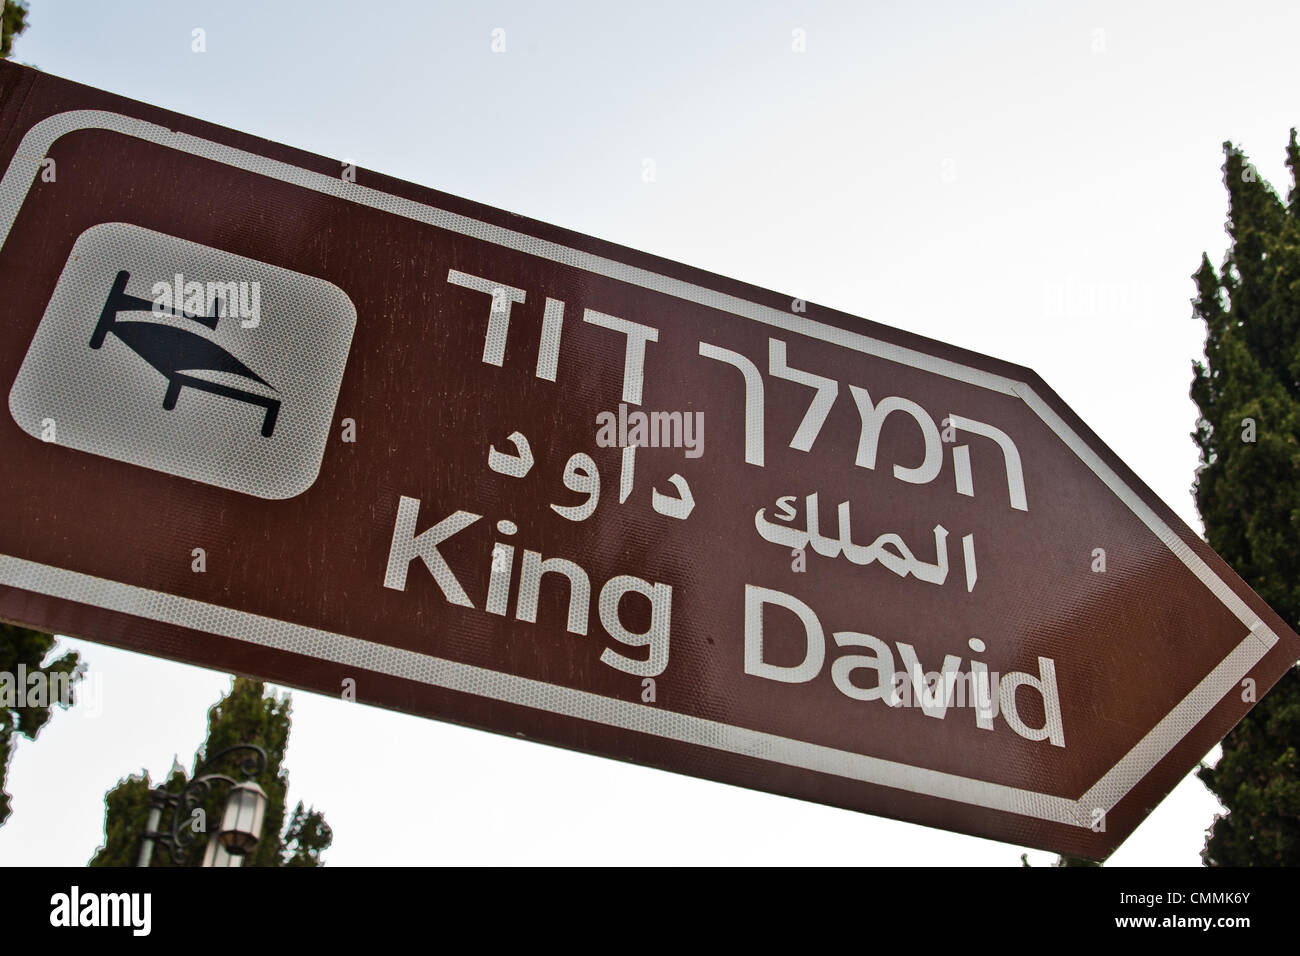 Street sign pointing to King David Hotel main entrance. Hotel housed the British Mandate Secretariat and army headquarters. In July 1946 underground Irgun resistance fighters planted explosives in the basement, destroying west wing and killing 92. Jerusalem, Israel. 19-June-2012. Stock Photo